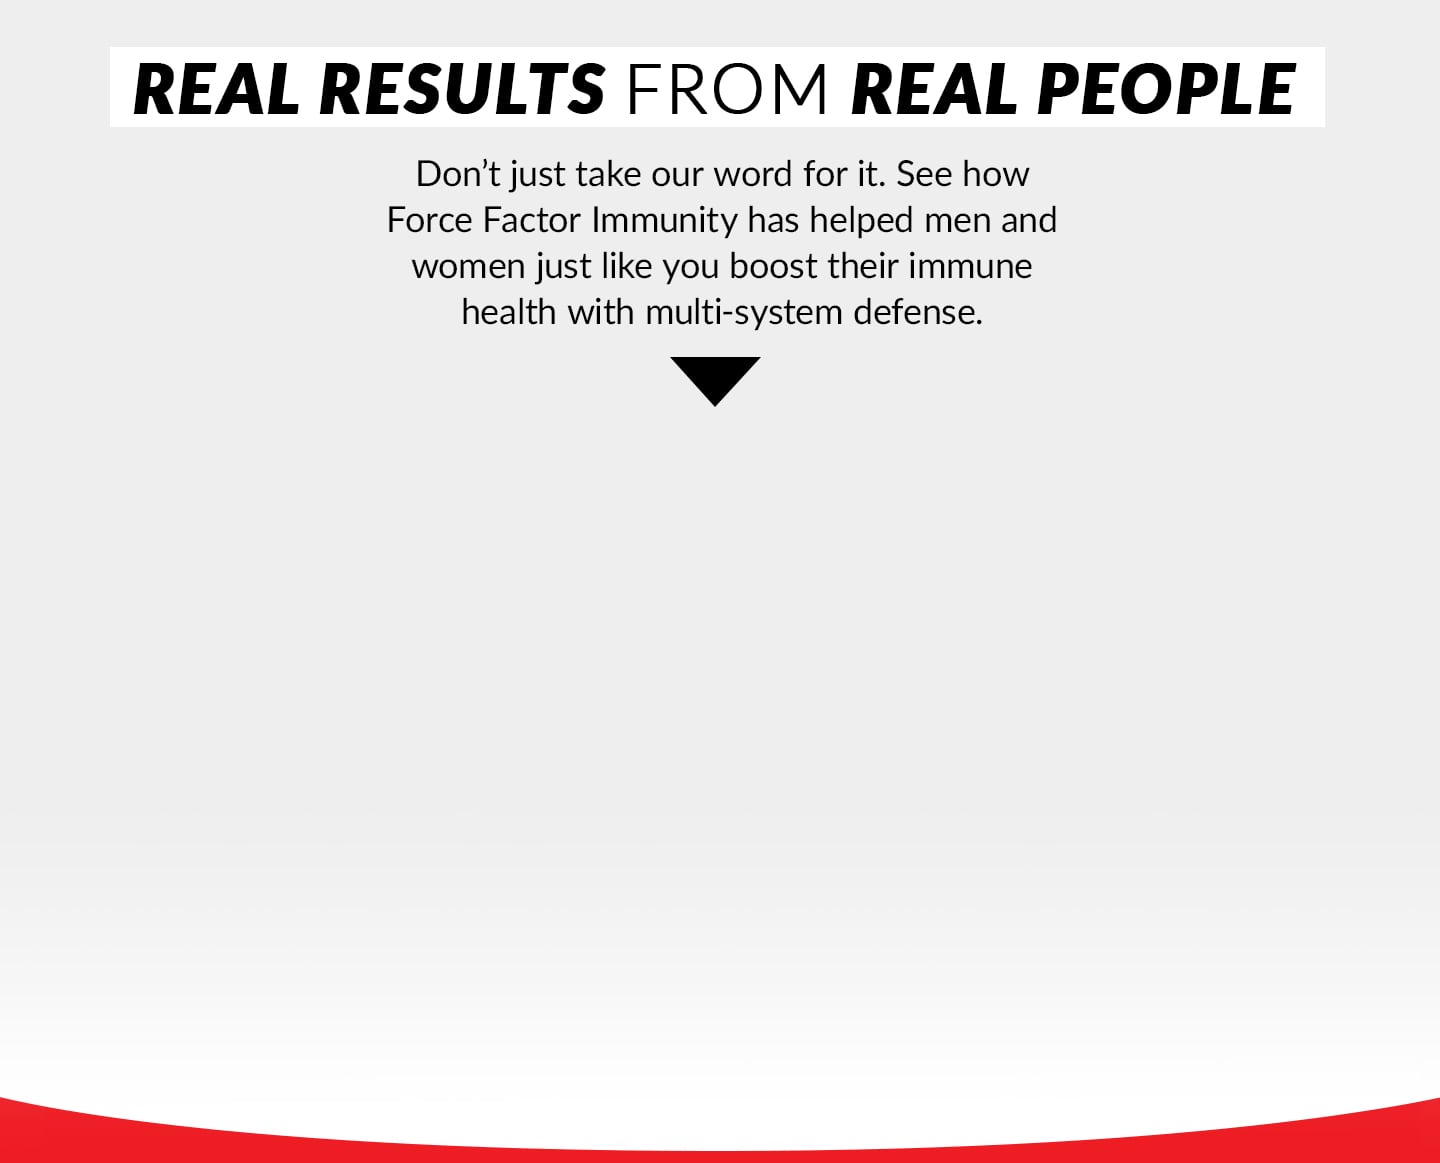 REAL RESULTS FROM REAL PEOPLE. Don’t just take our word for it. See how Force Factor Immunity has helped men and women just like you boost their immune health with multi-system defense.